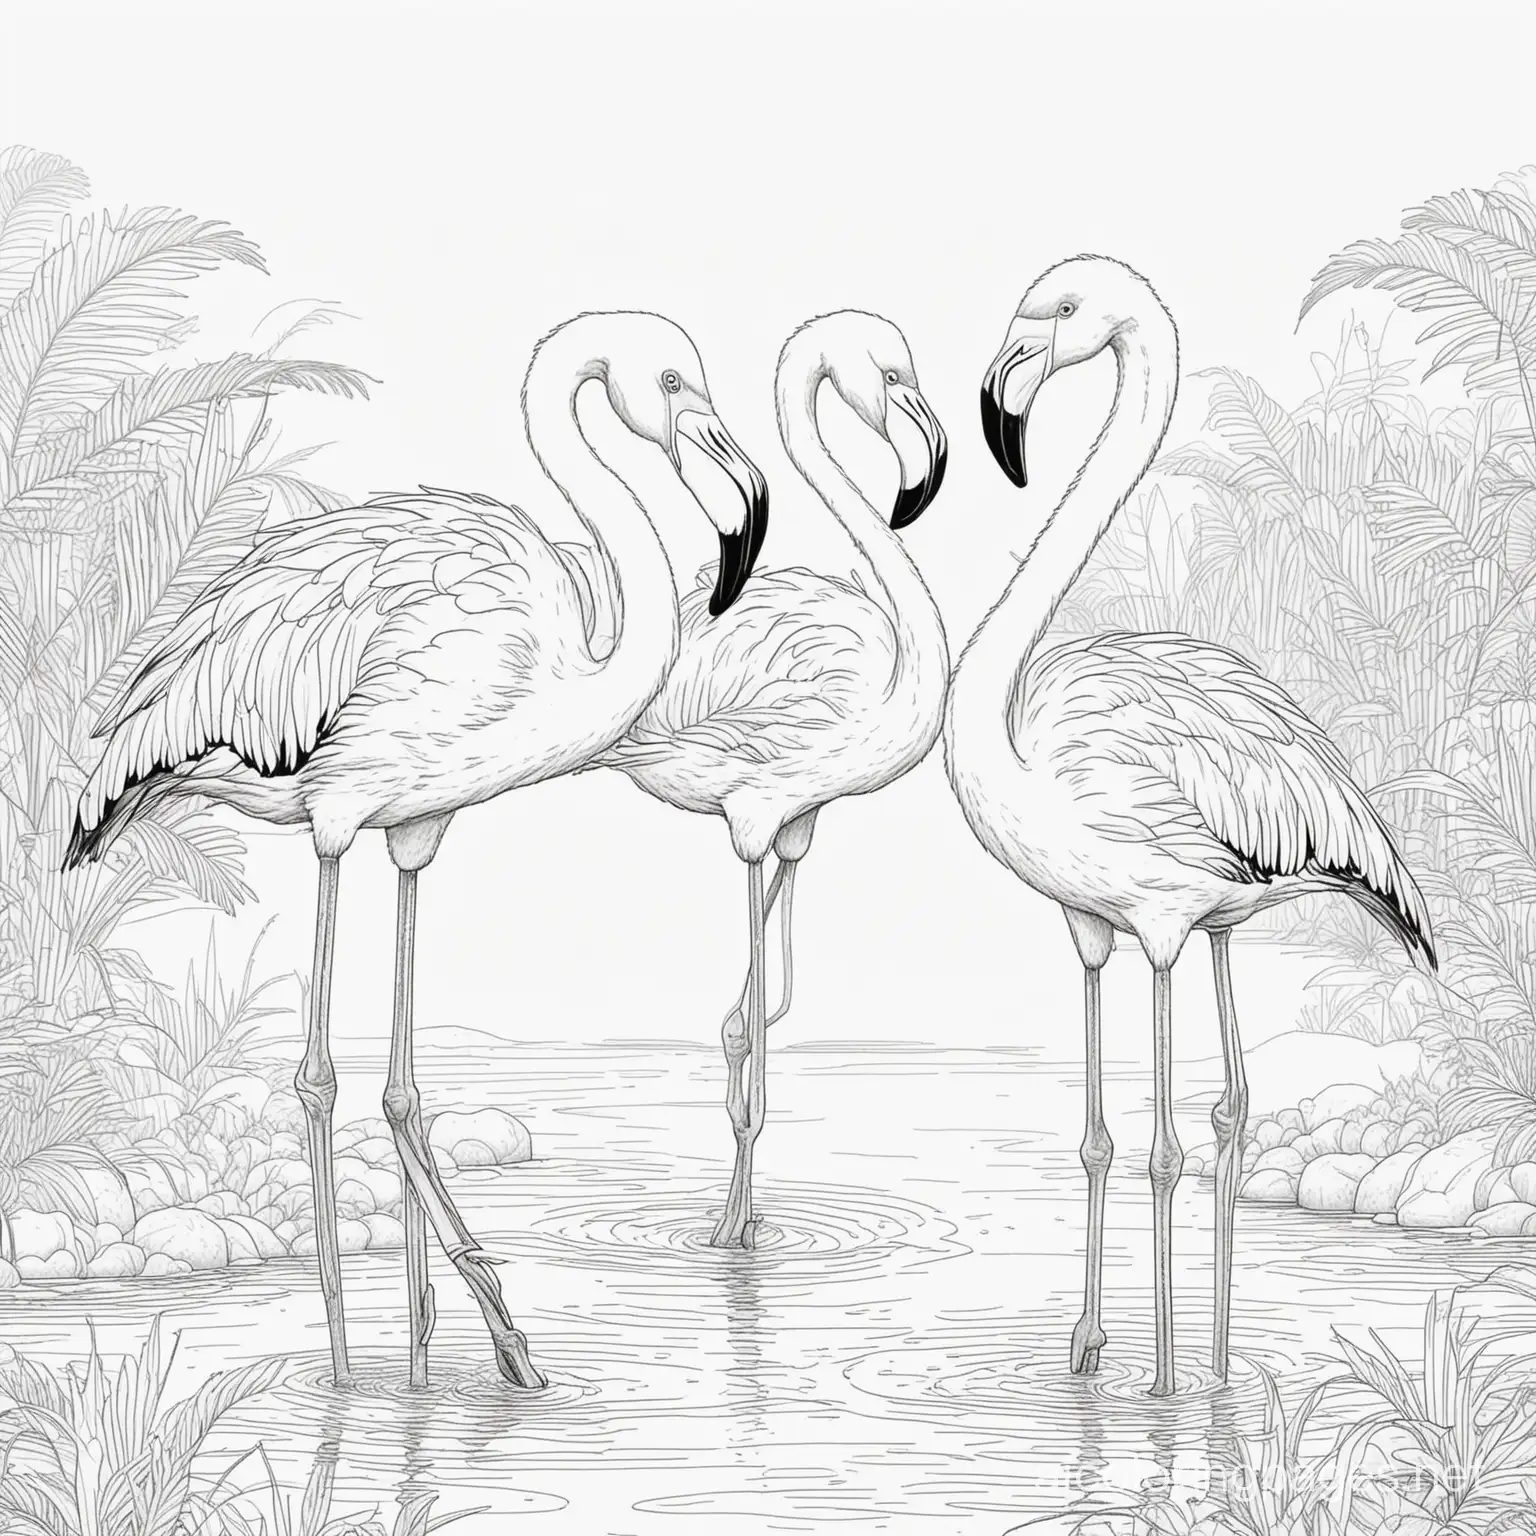 Flamingo flock




, Coloring Page, black and white, line art, white background, Simplicity, Ample White Space. The background of the coloring page is plain white to make it easy for young children to color within the lines. The outlines of all the subjects are easy to distinguish, making it simple for kids to color without too much difficulty